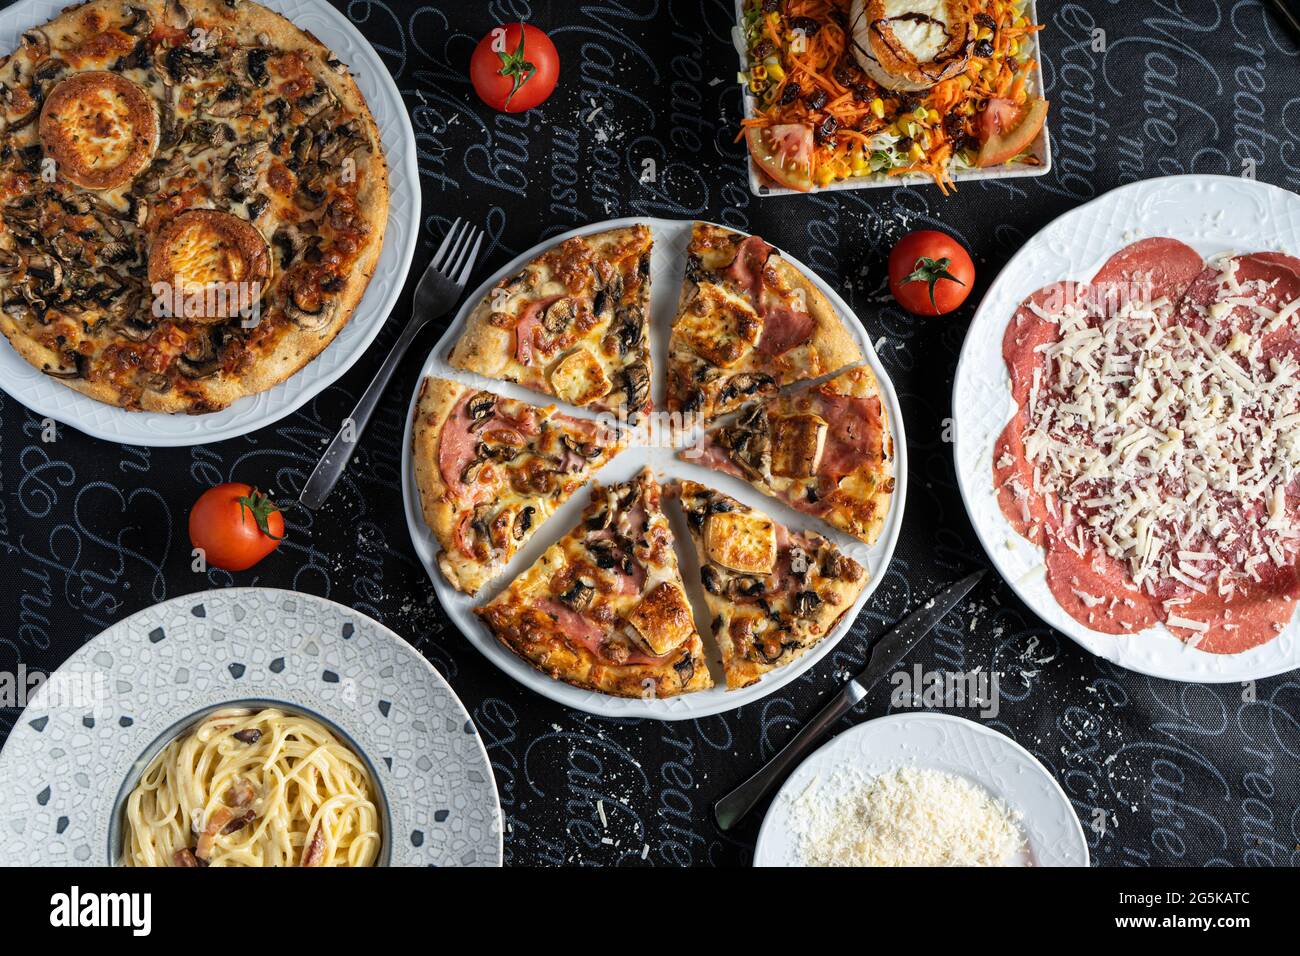 Variety of typical dishes of Italian cuisine Stock Photo